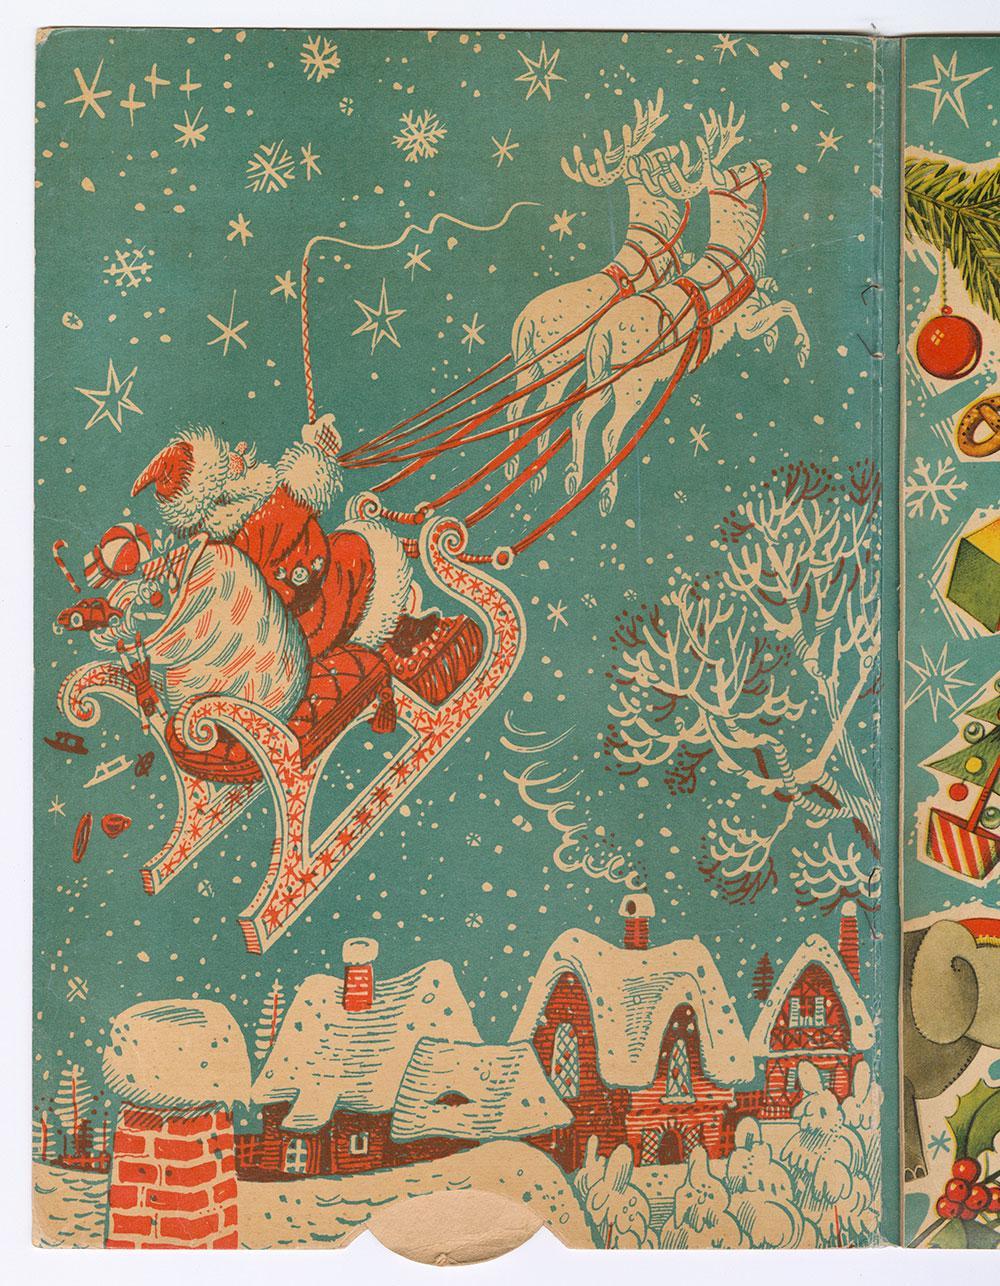 Detail of the pop-up in Father Christmas, a book by Vojtěch Kubašta. SLSA: clrc i22817190